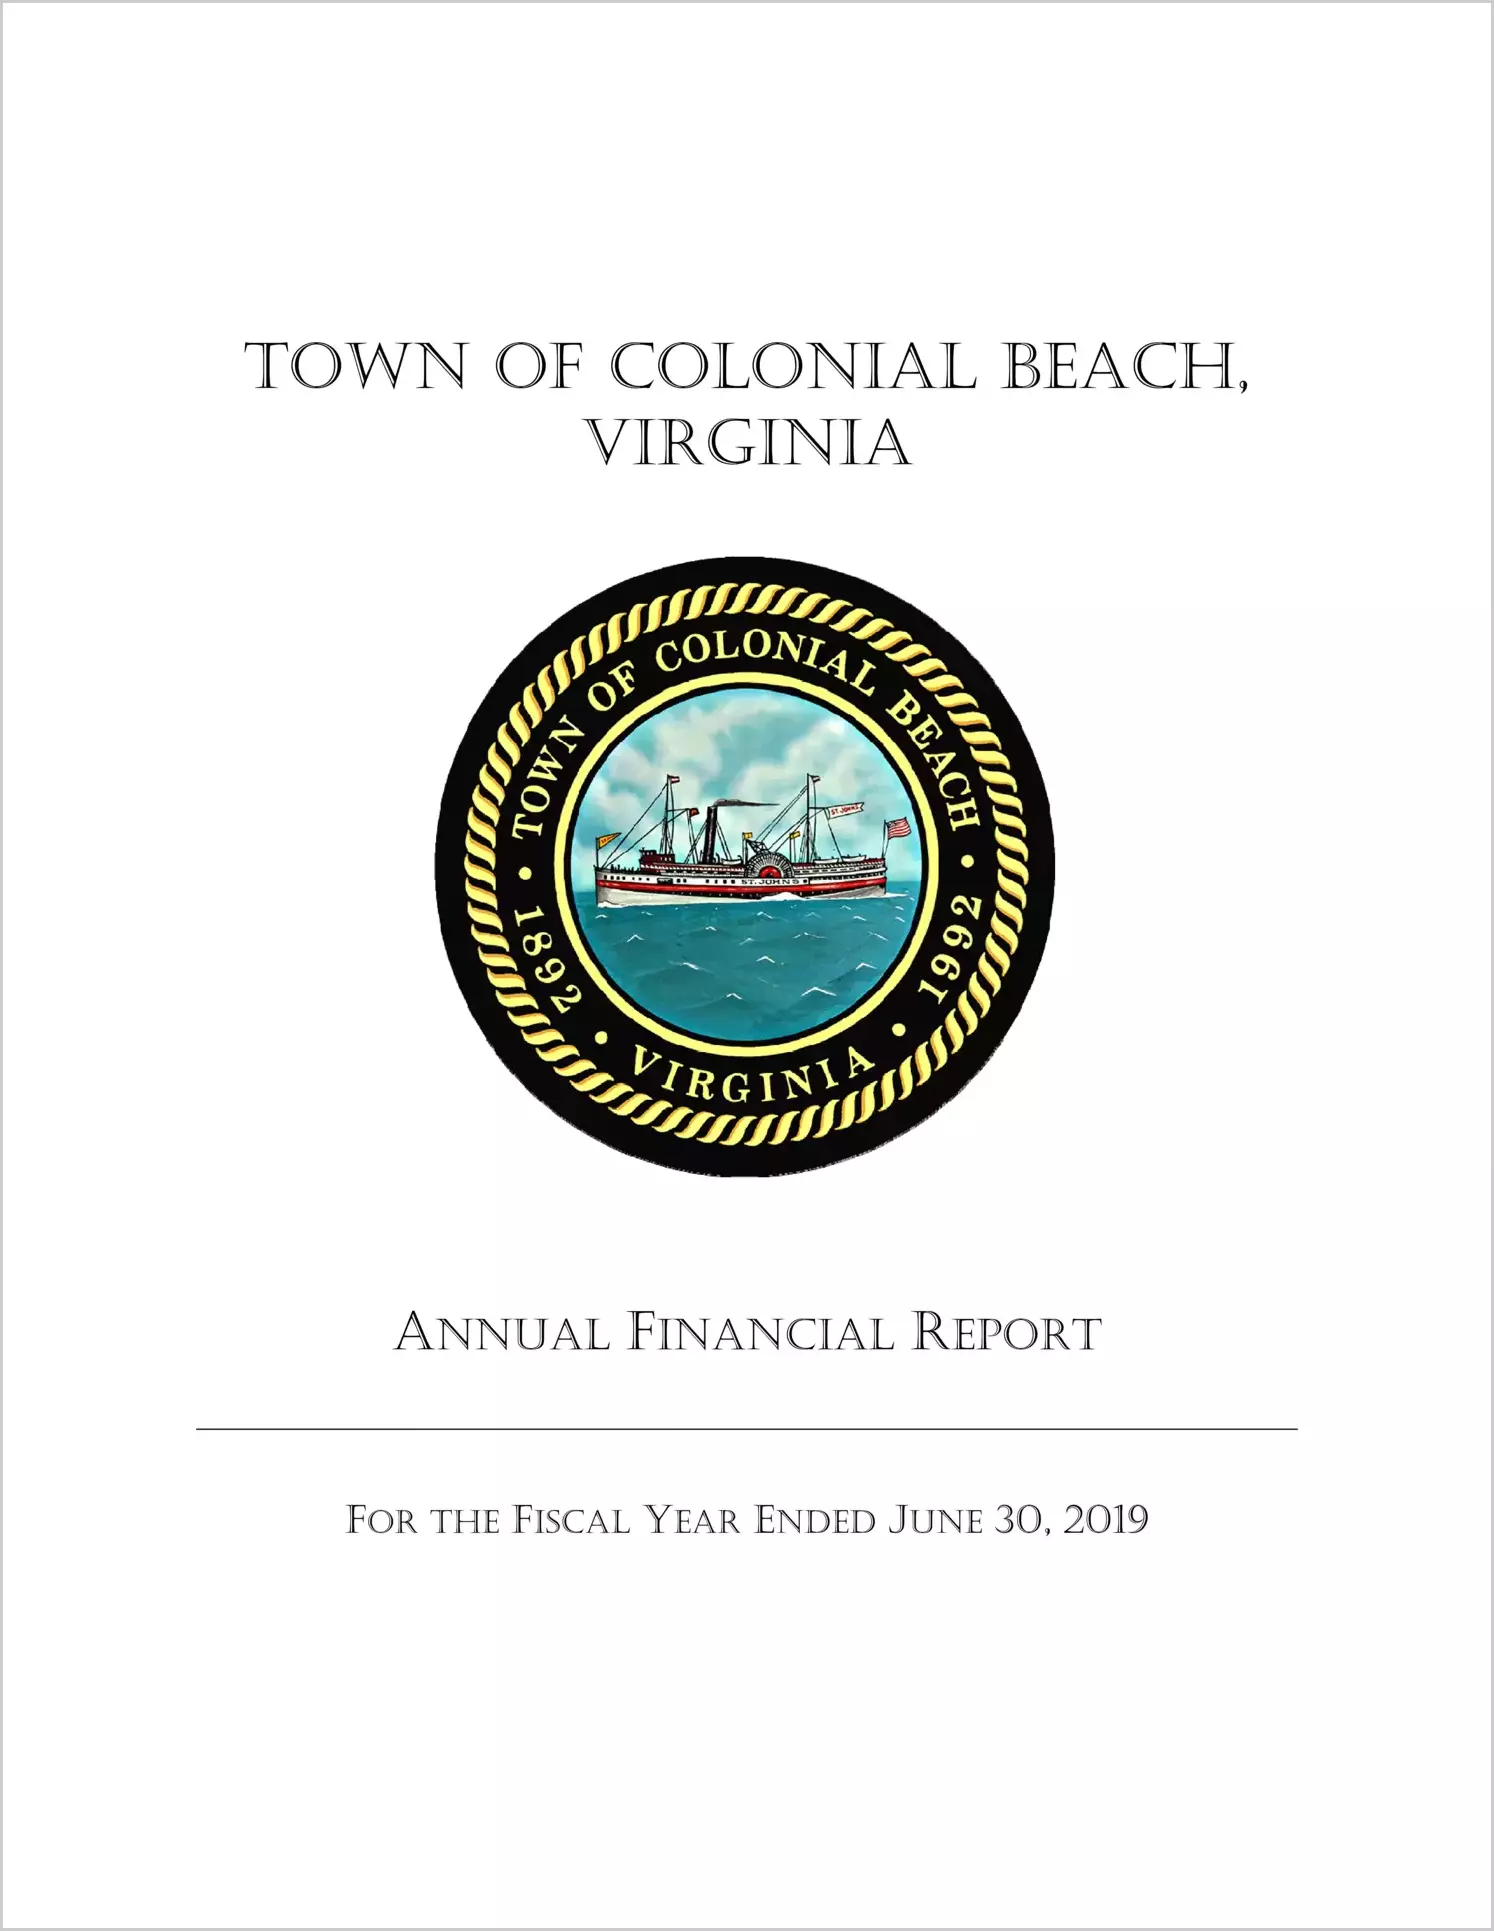 2019 Annual Financial Report for Town of Colonial Beach